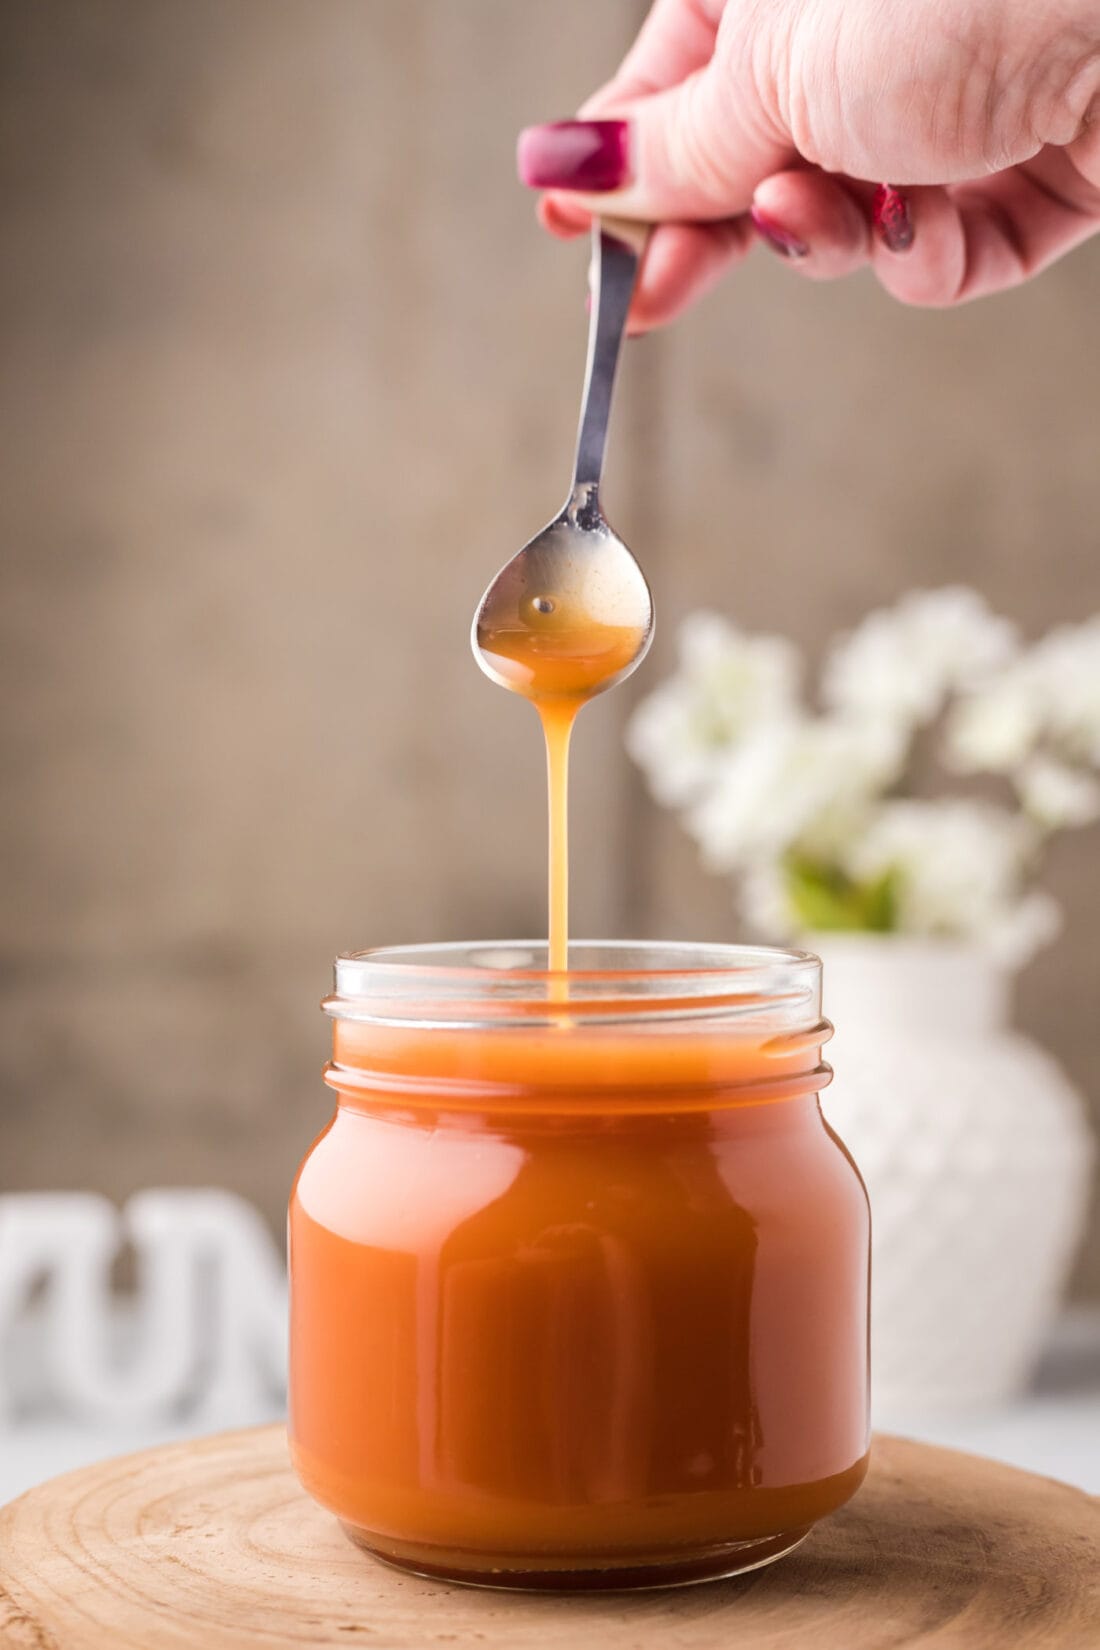 Sweet and Sour Sauce being drizzled off a spoon into a jar